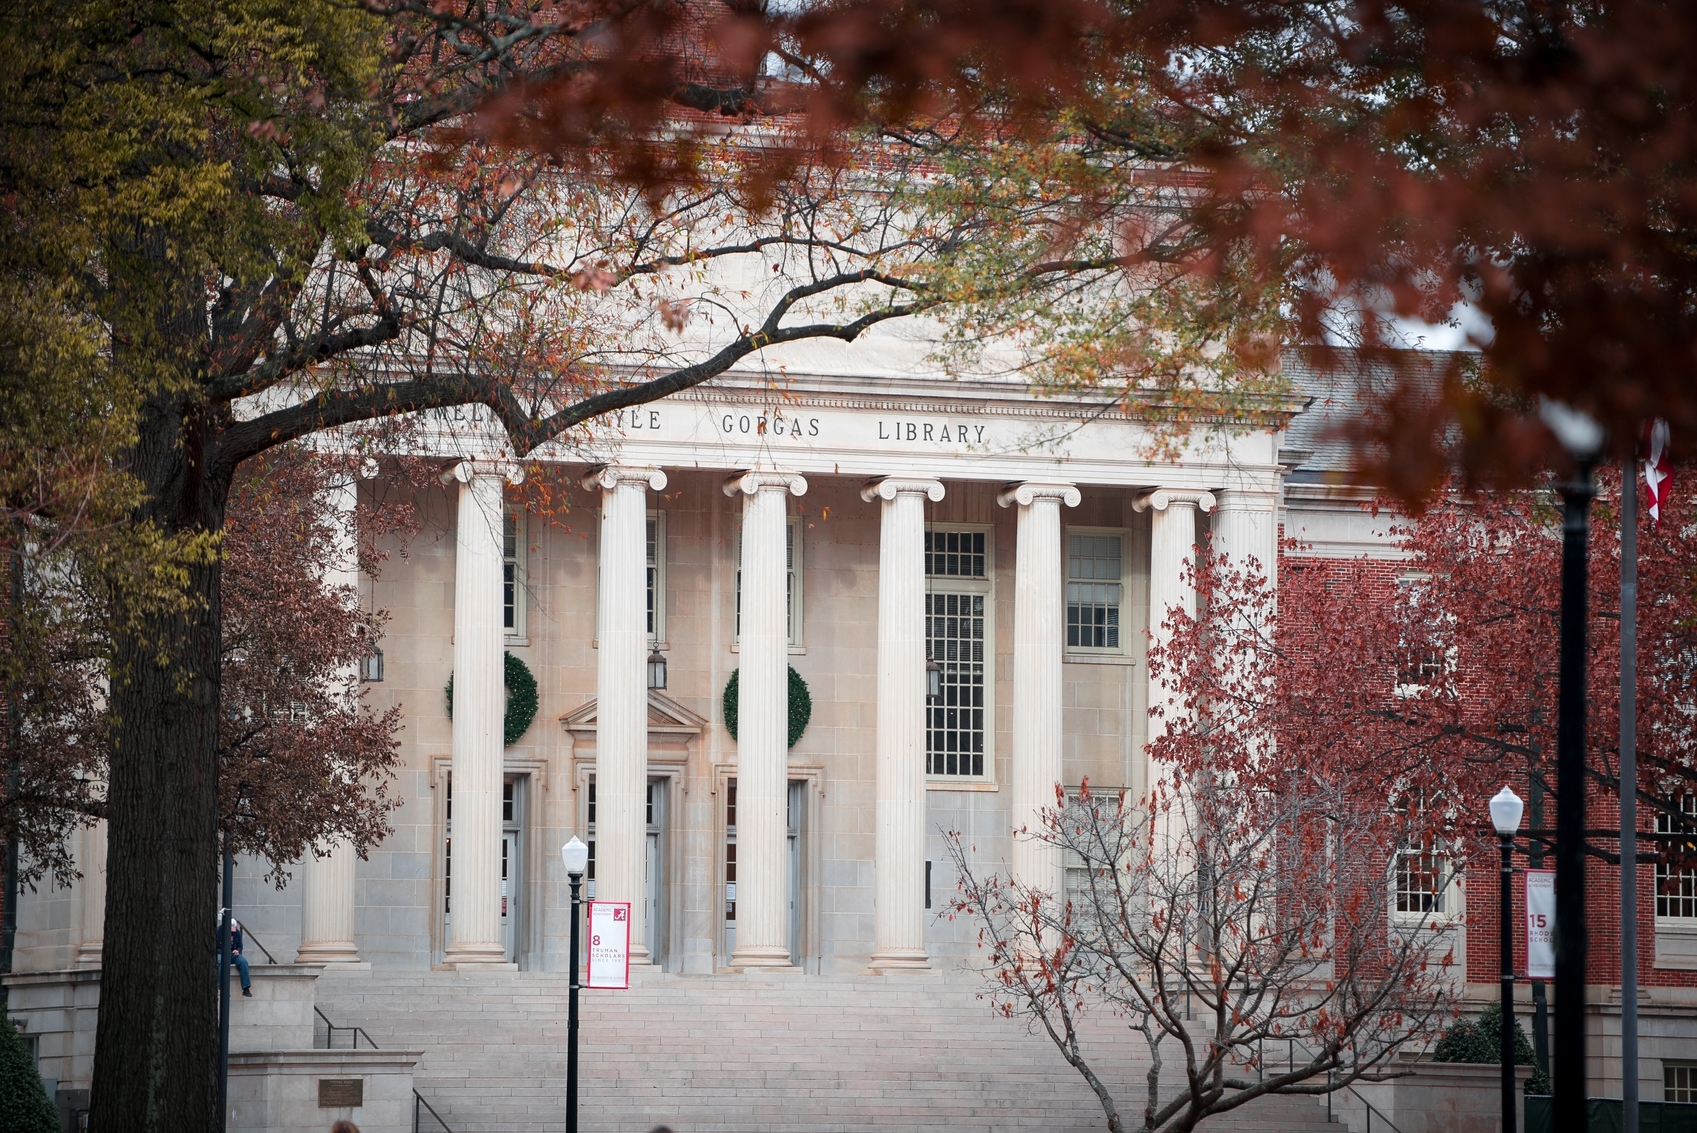 The exterior of Gorgas Library